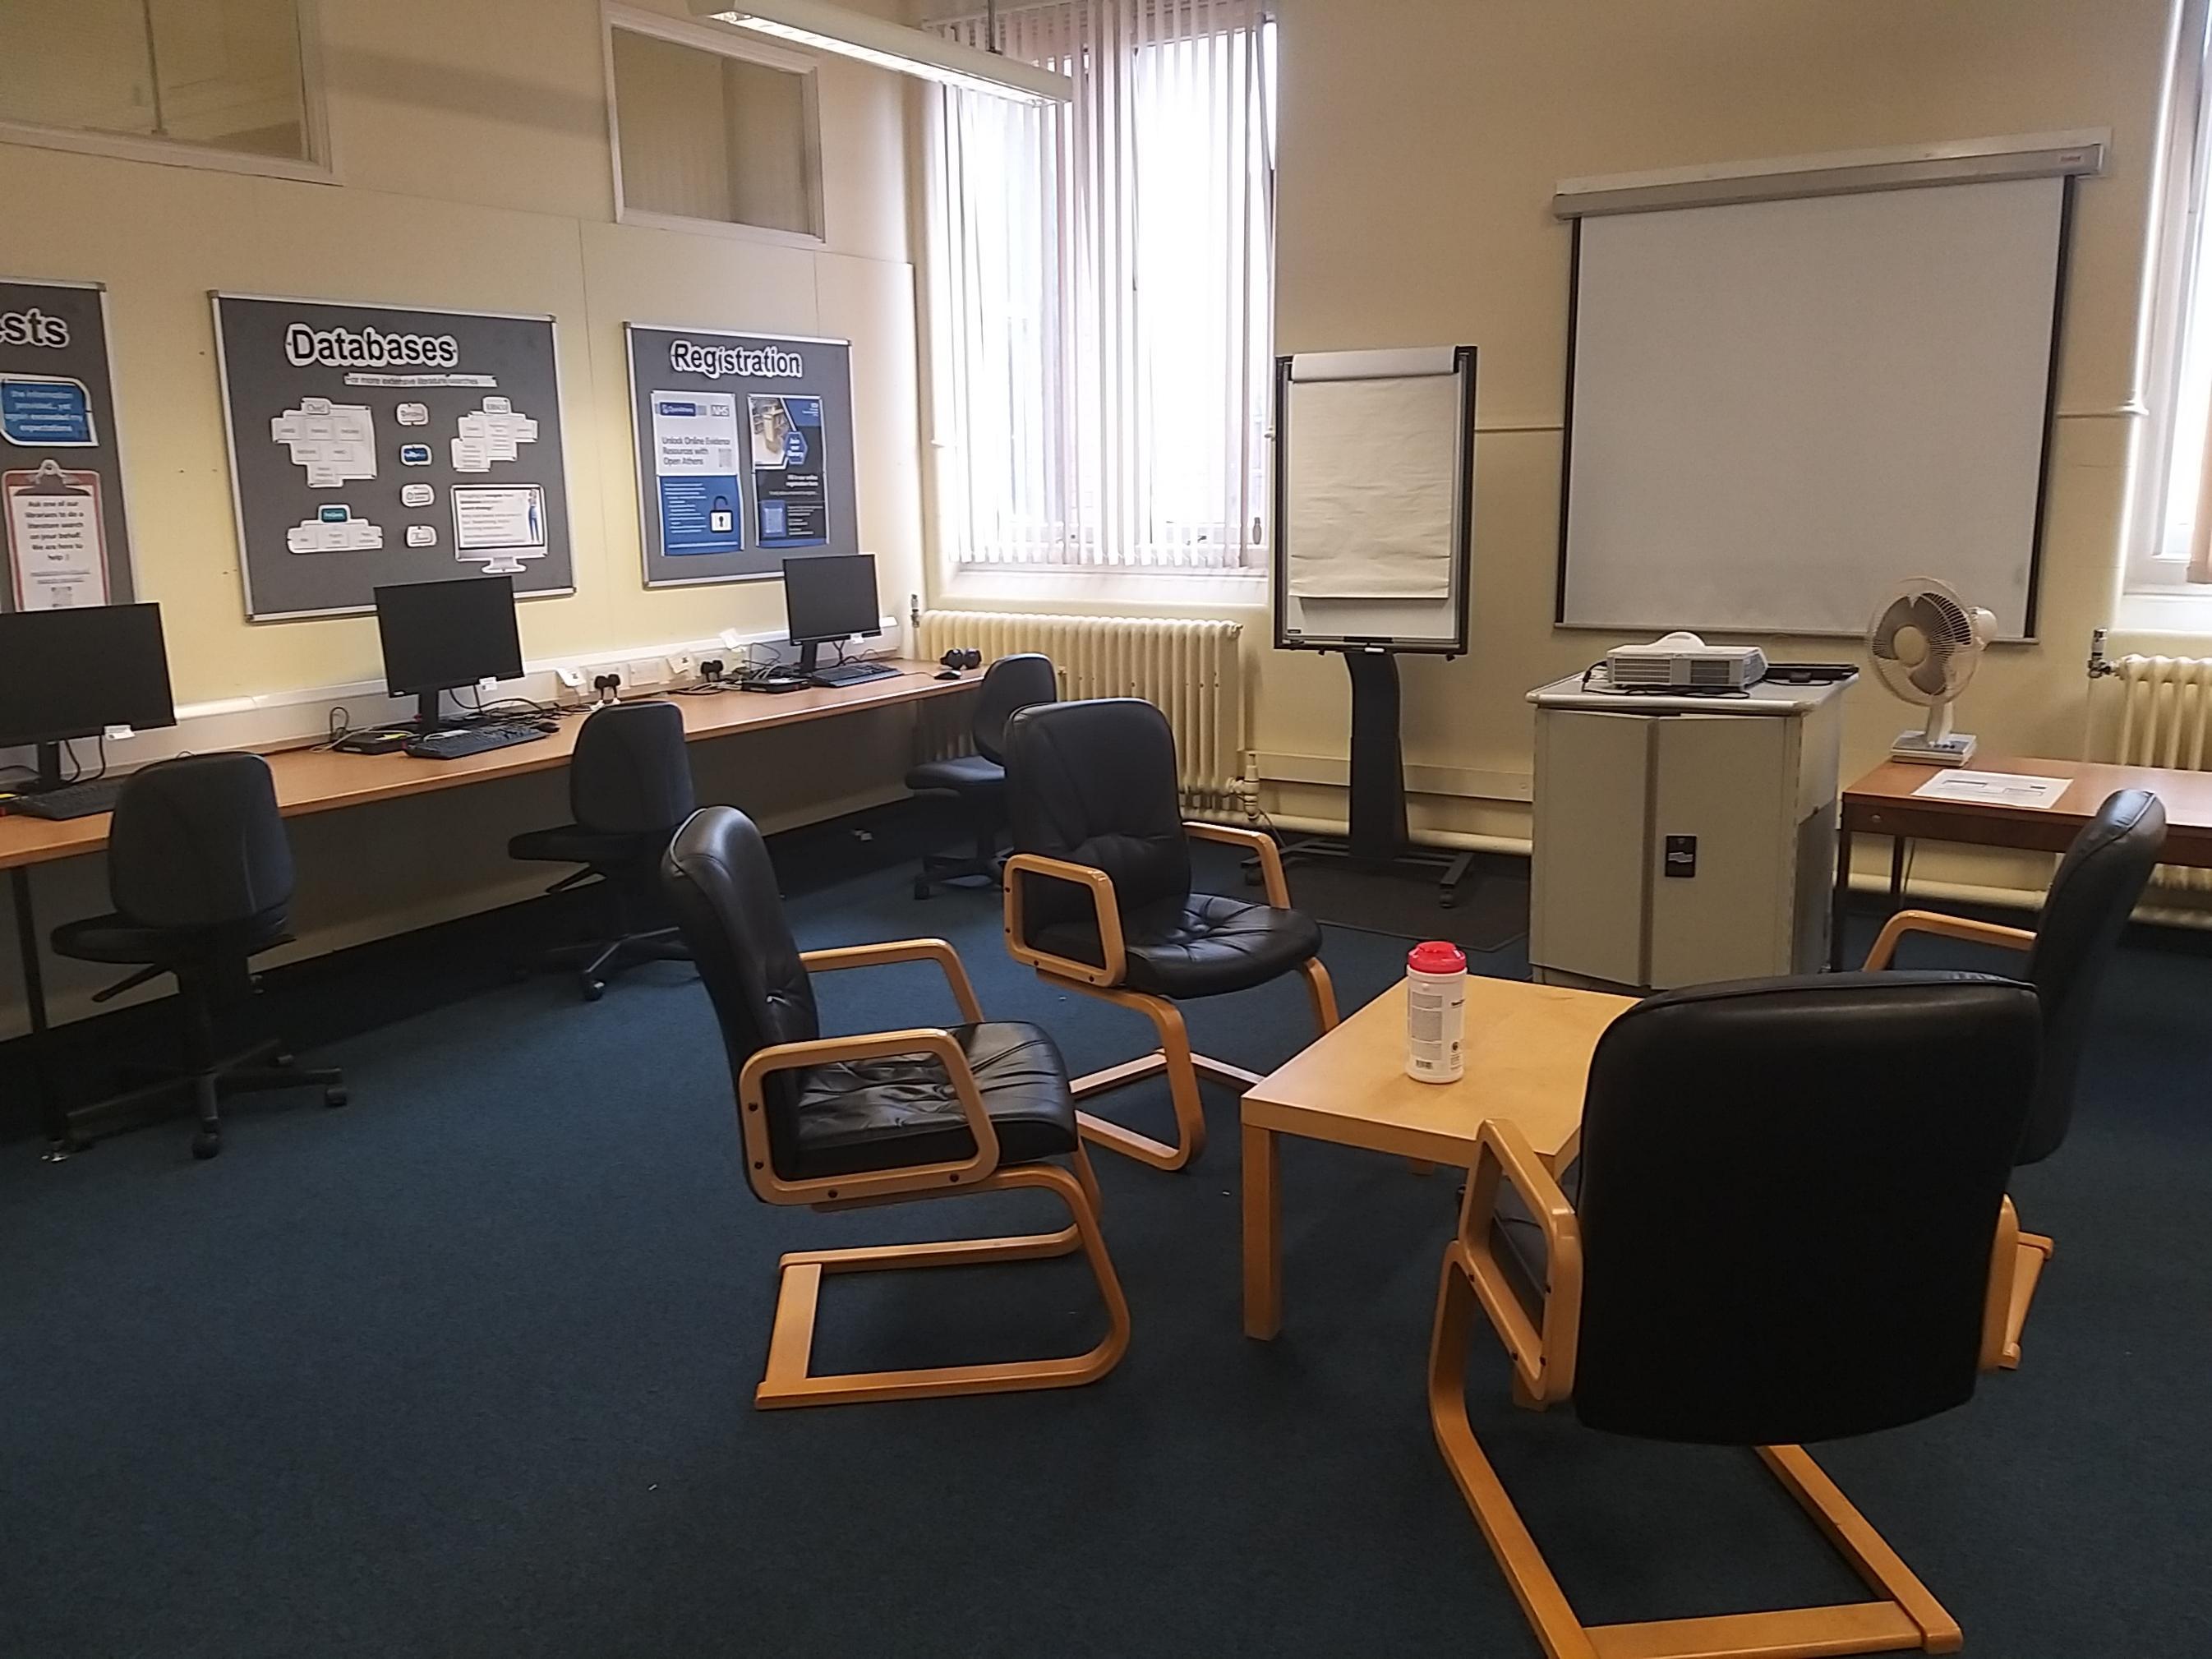 Photo of It Suite showing PCs facing the wall, a projector floor unit and flipchart